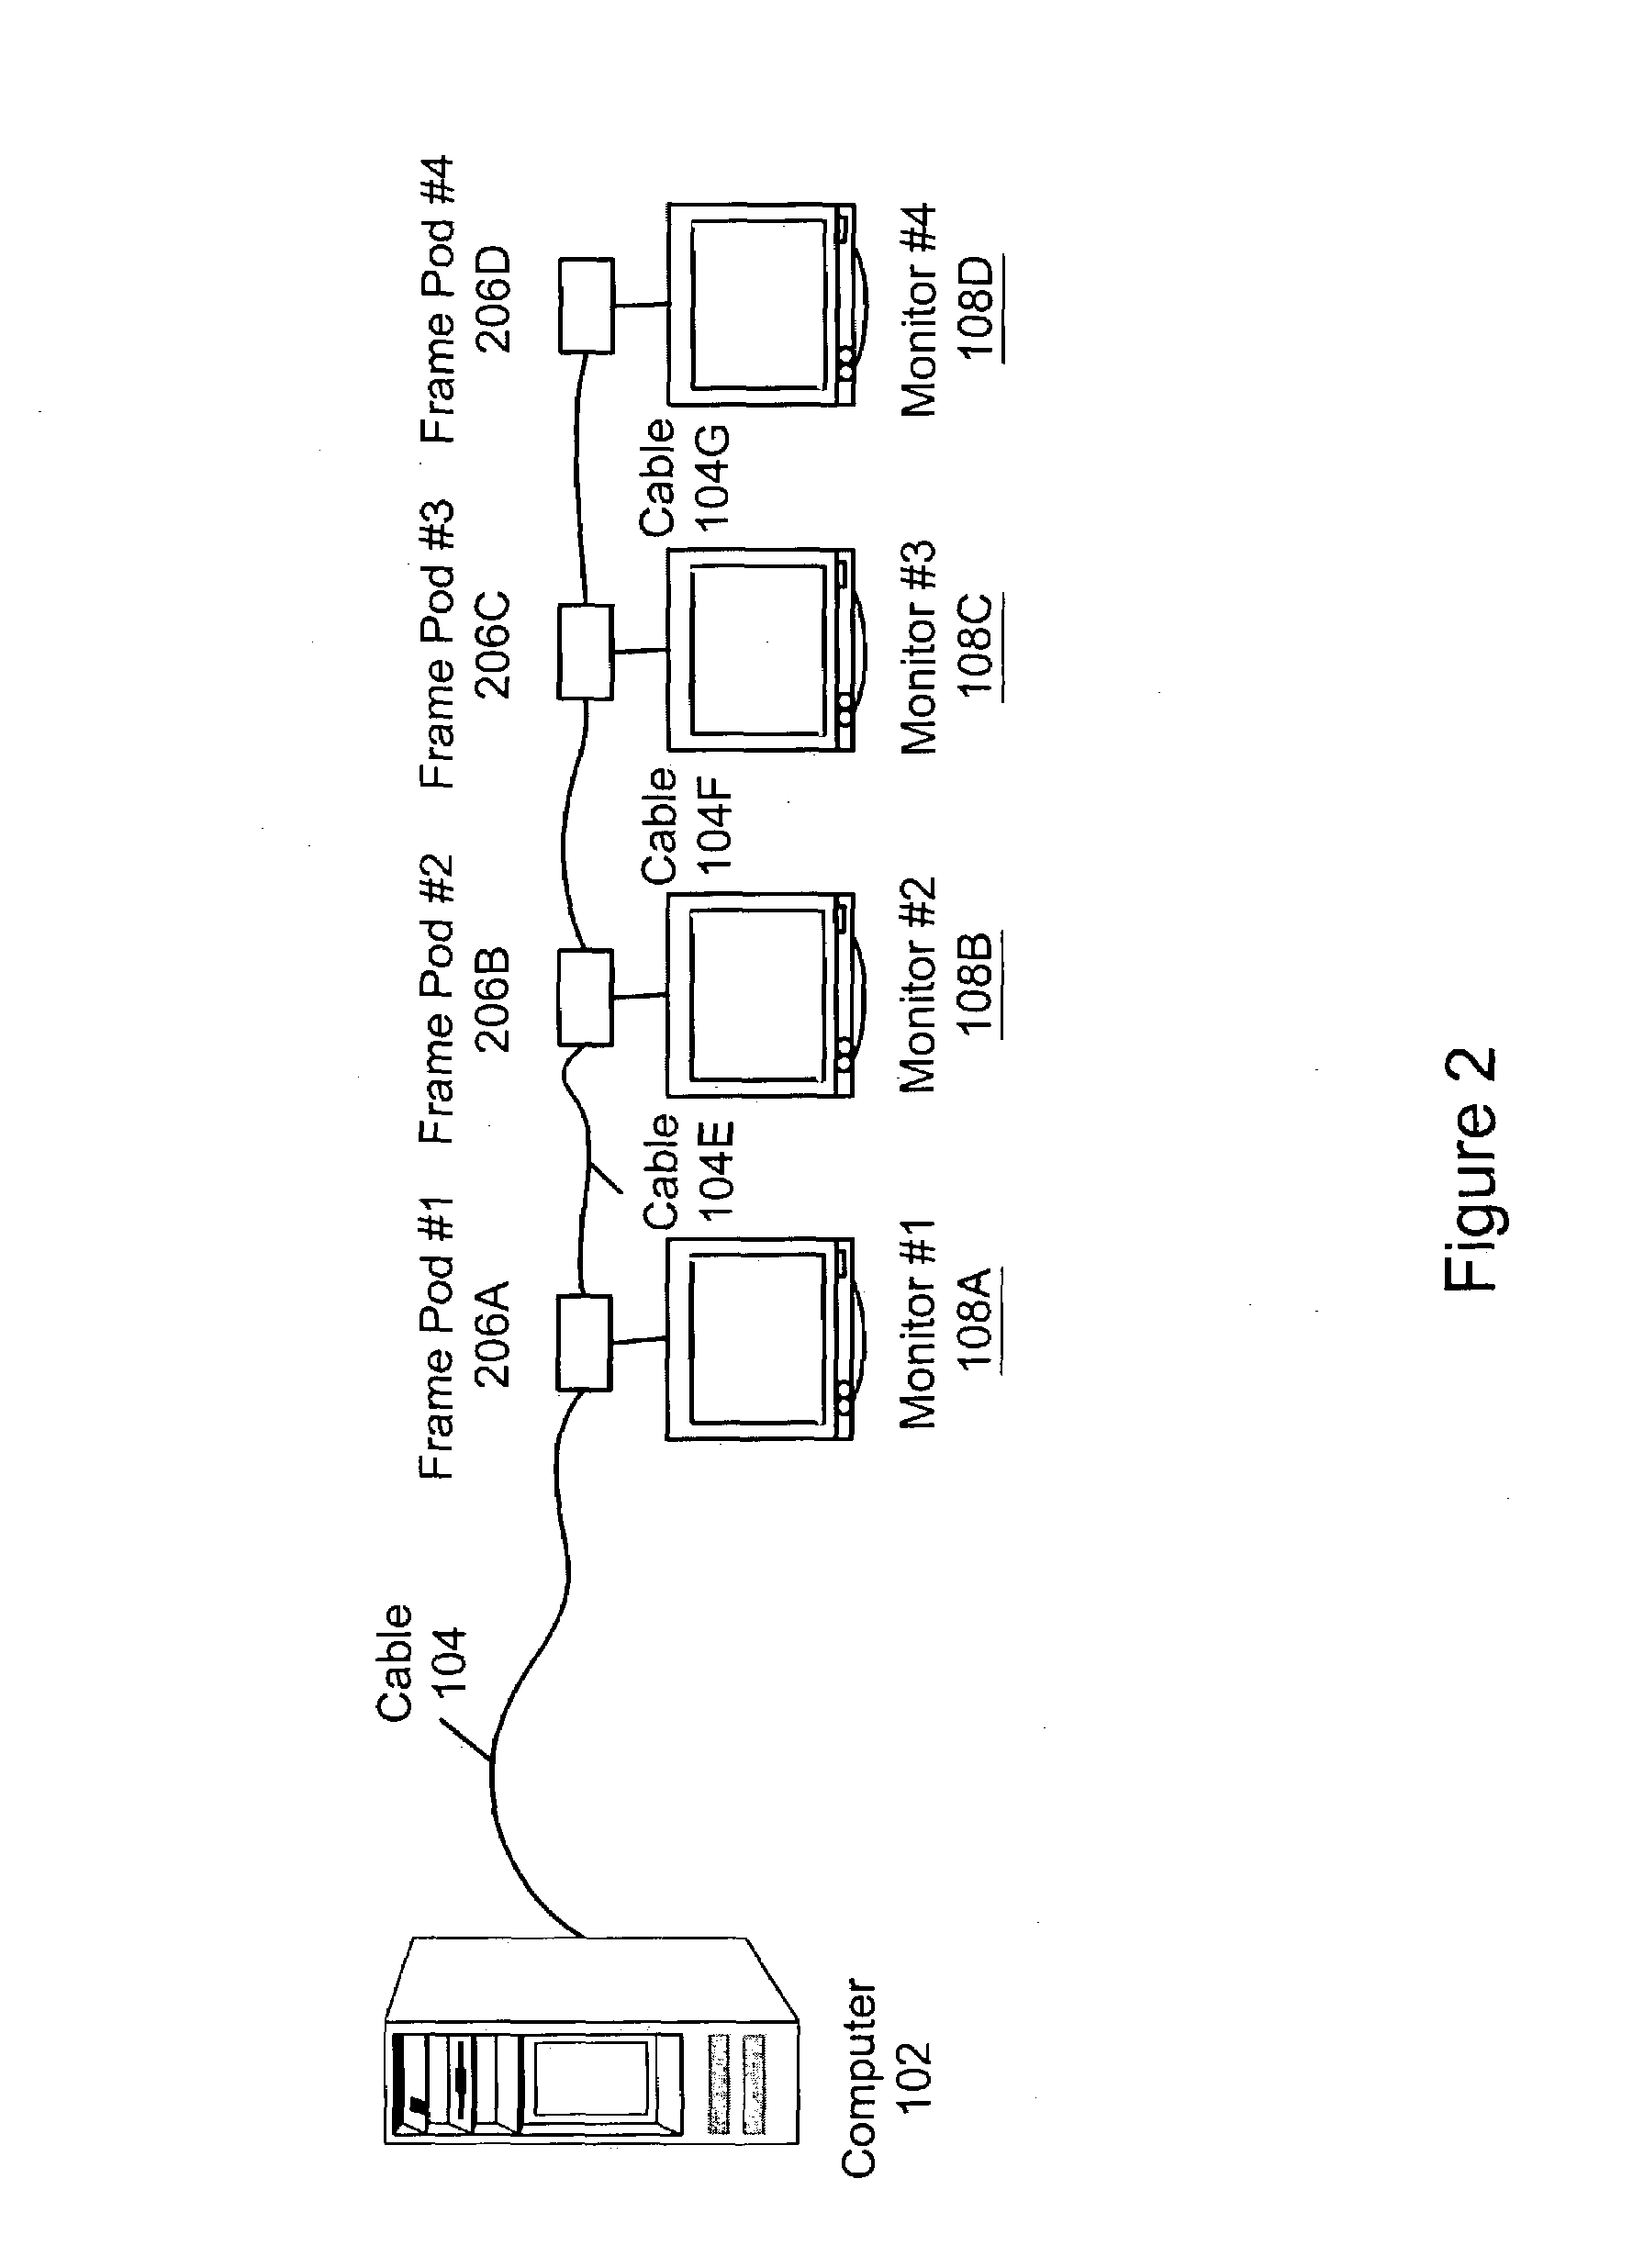 Selectively updating a display in a multi-display system